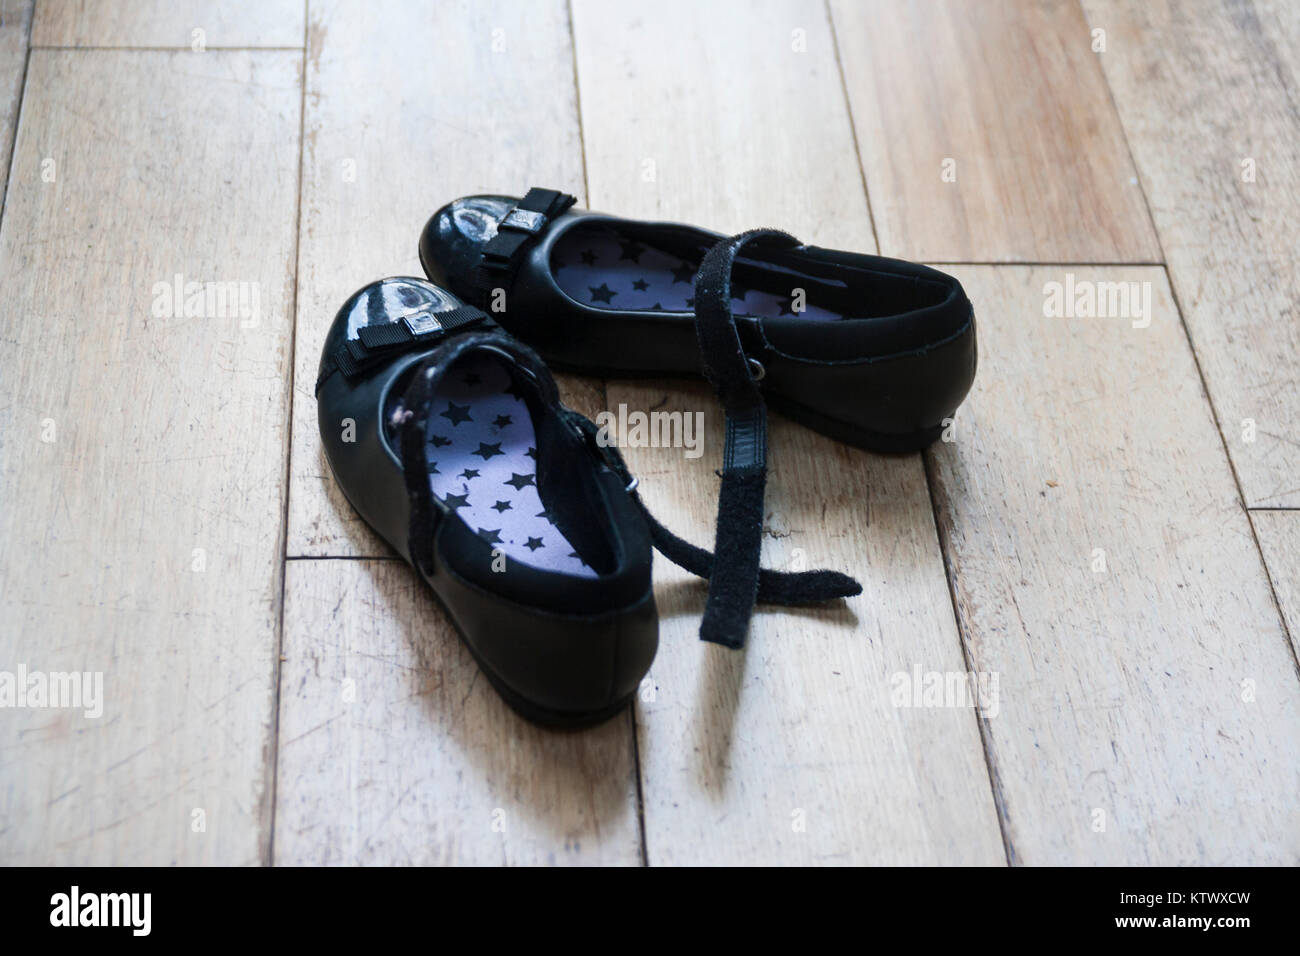 childrens black patent leather clark's shoes Stock Photo